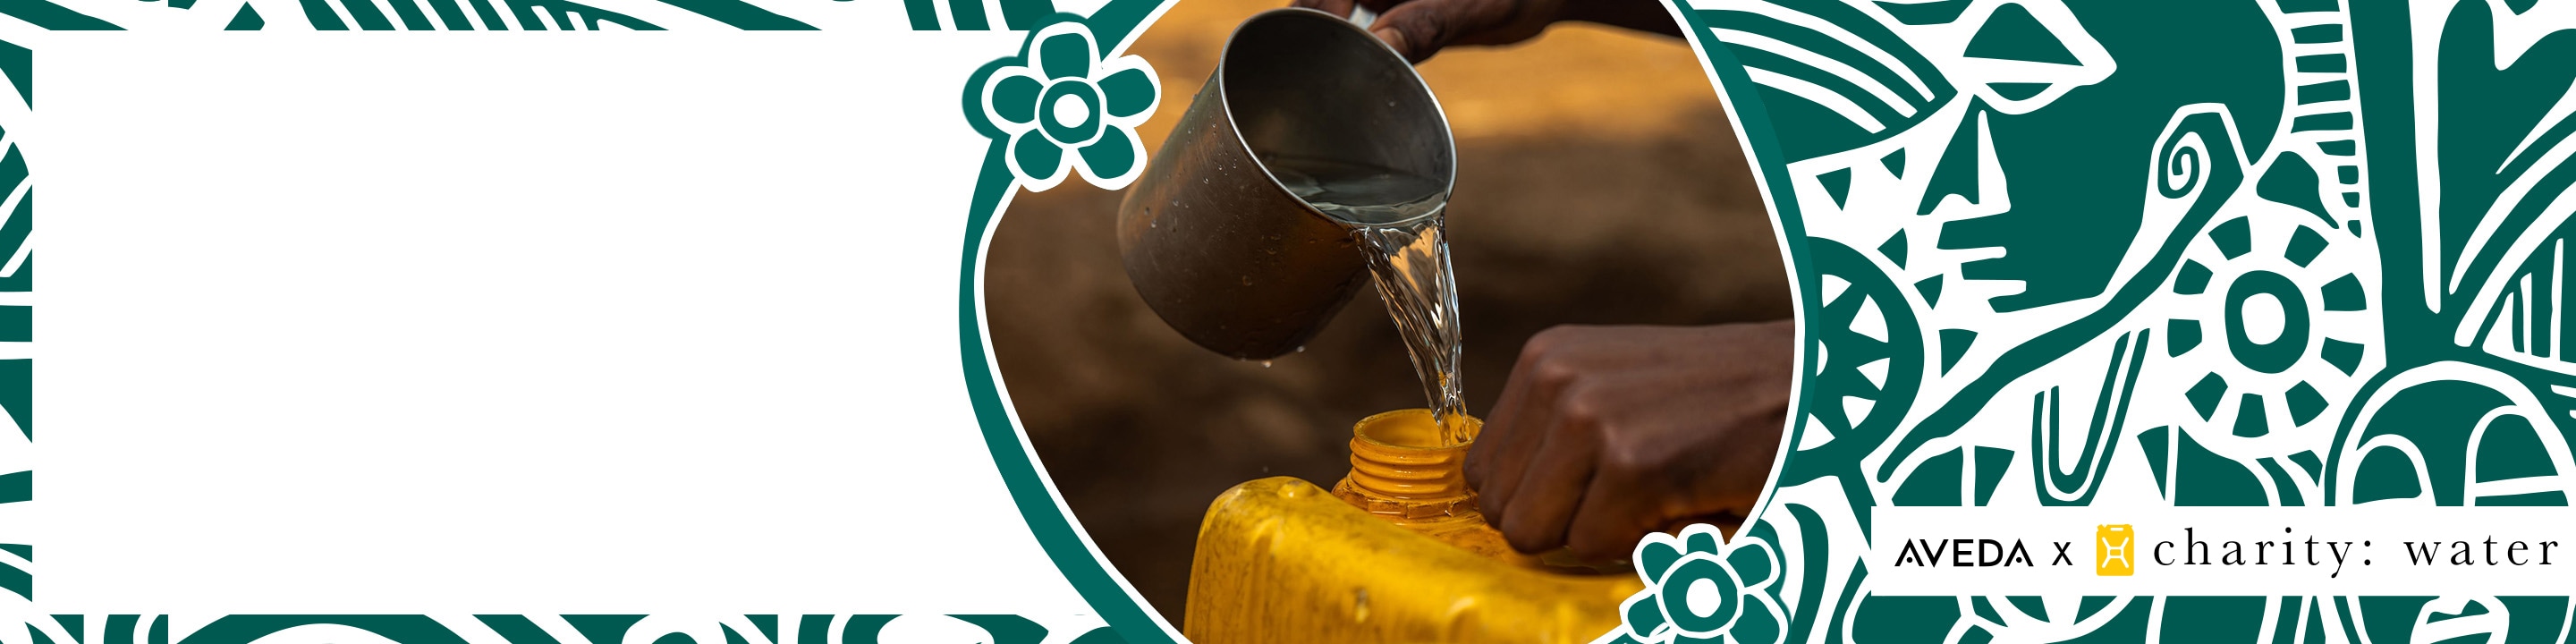 Every drop of water makes a difference. Learn how you can support clean water.